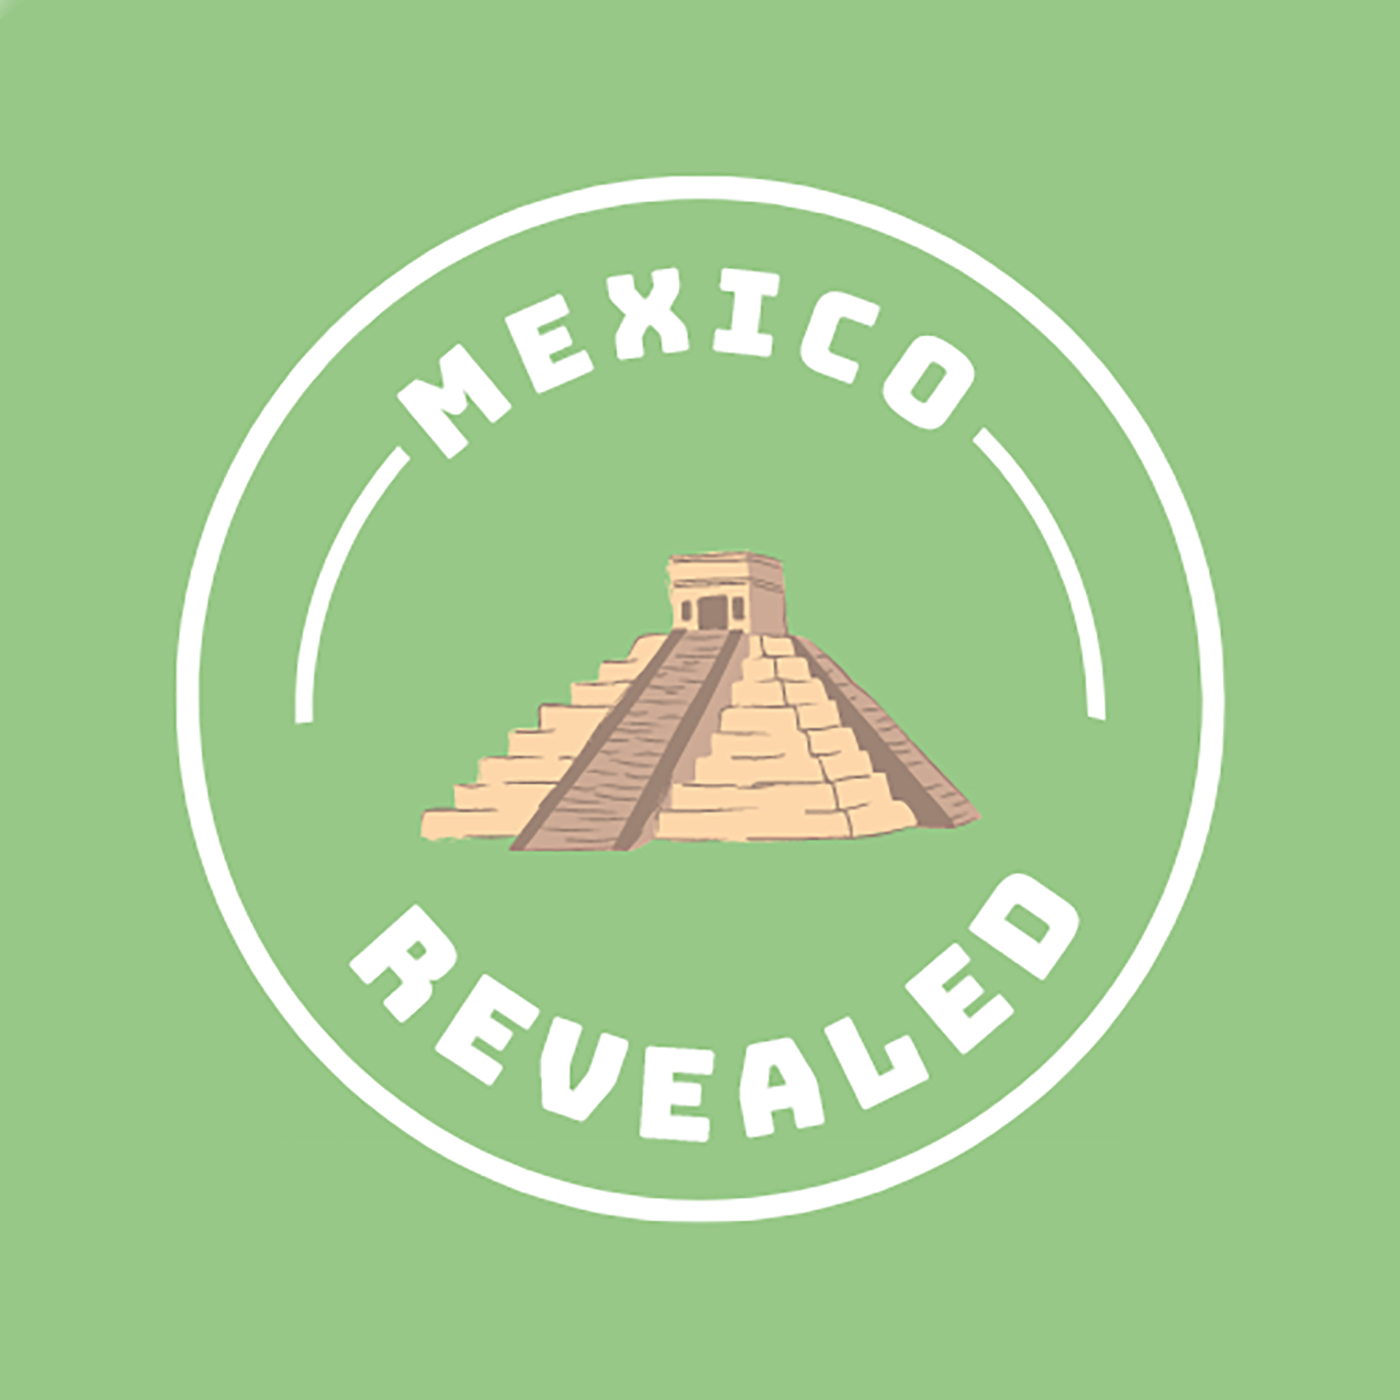 Ep. 5: Never Been to Mexico? Hear From a First-Timer